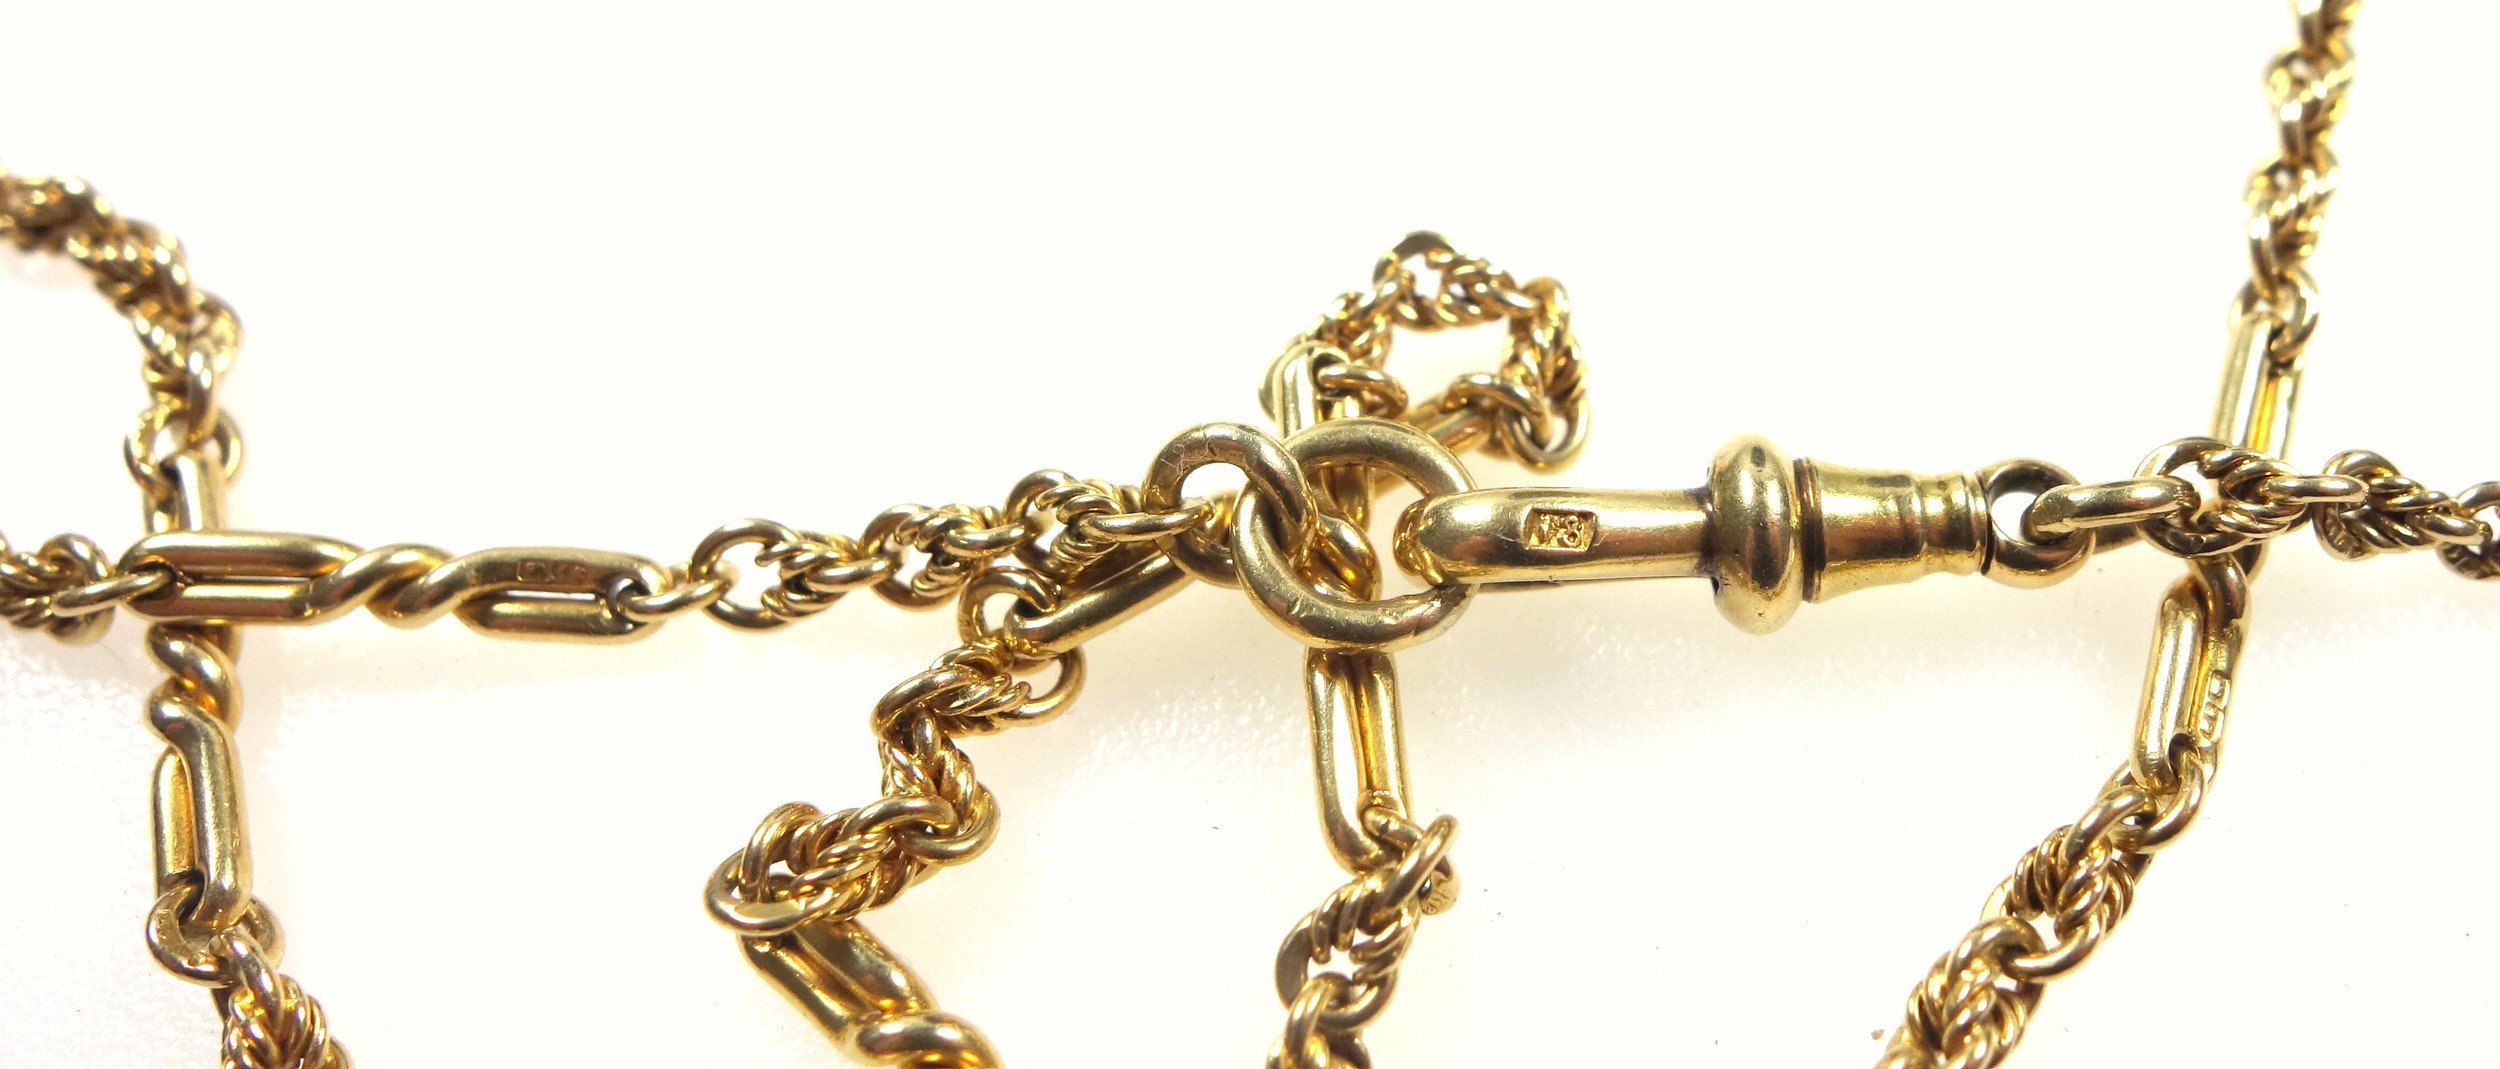 Victorian 18ct gold guard chain with fancy bar and twist links and "dog collar" clasp, L.150cm, 63. - Image 2 of 2